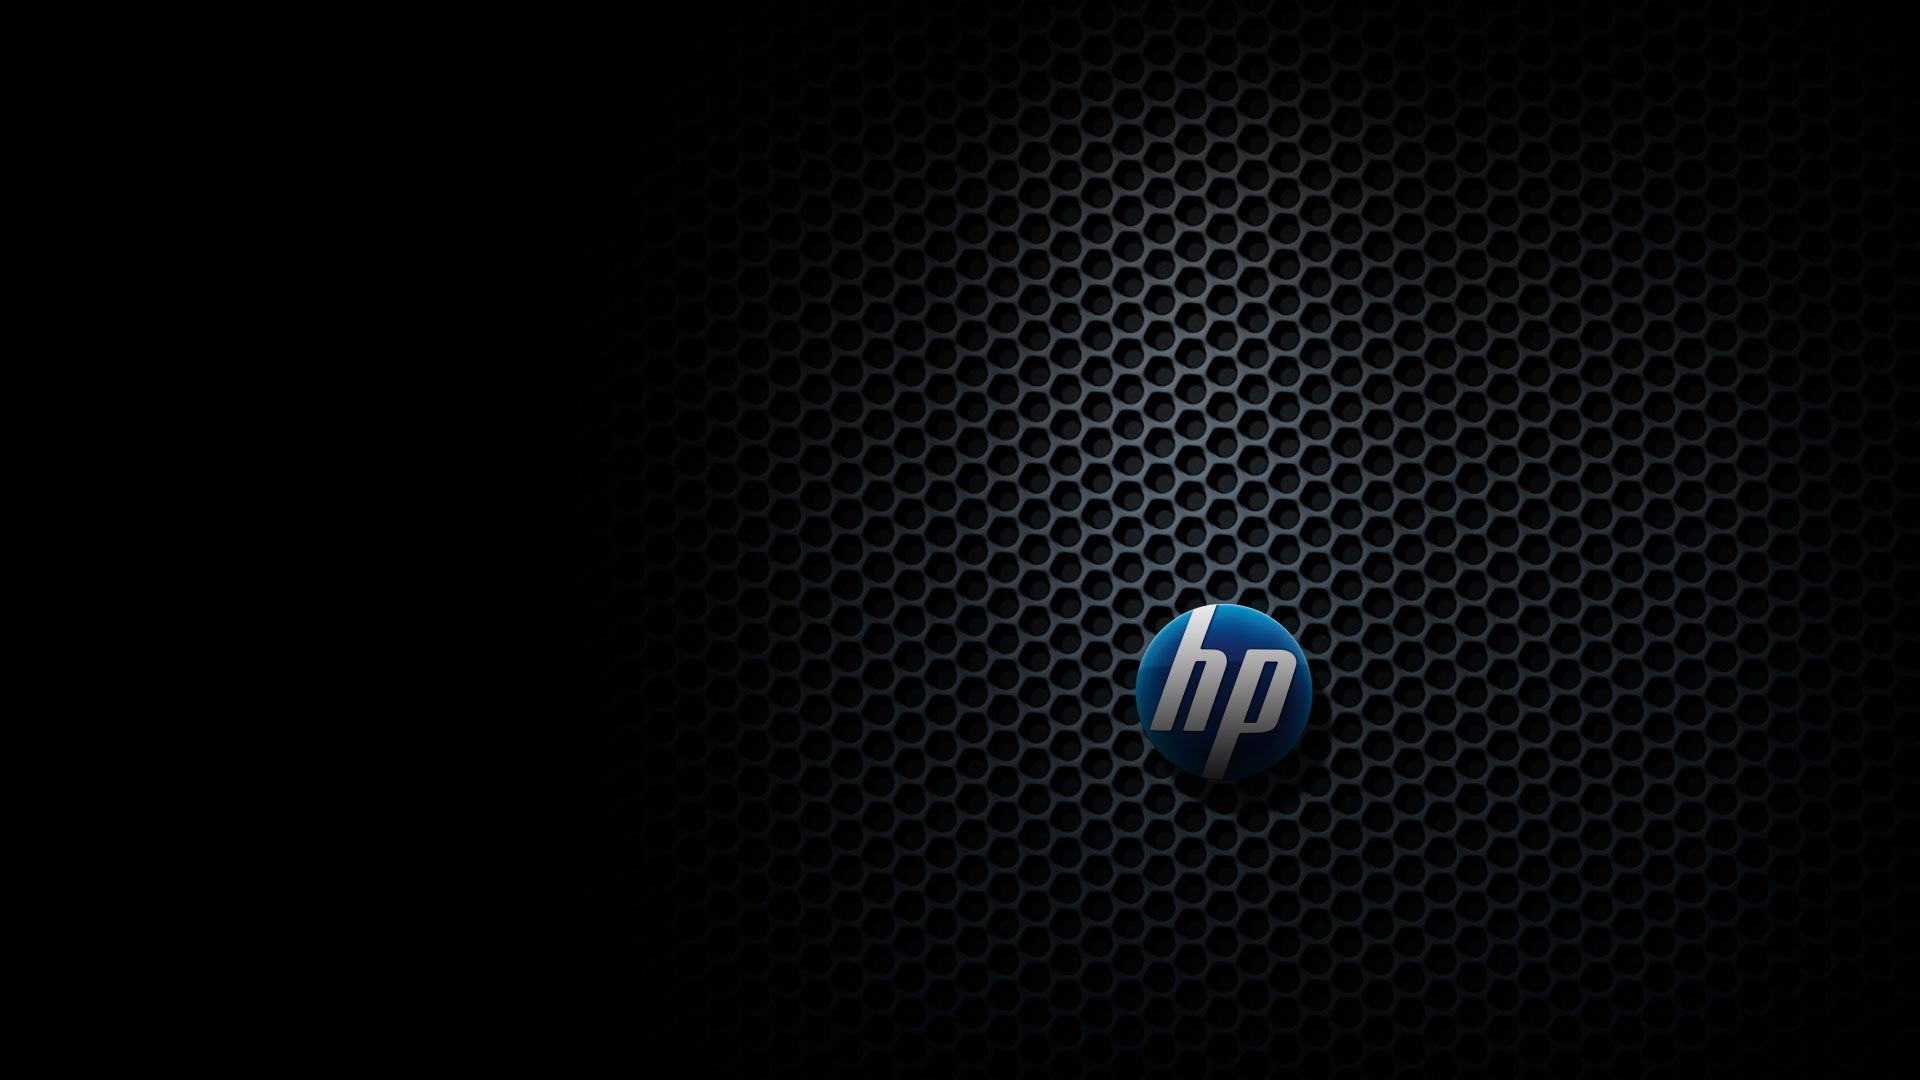 Hp Wallpapers Hd 1080p 69 Images